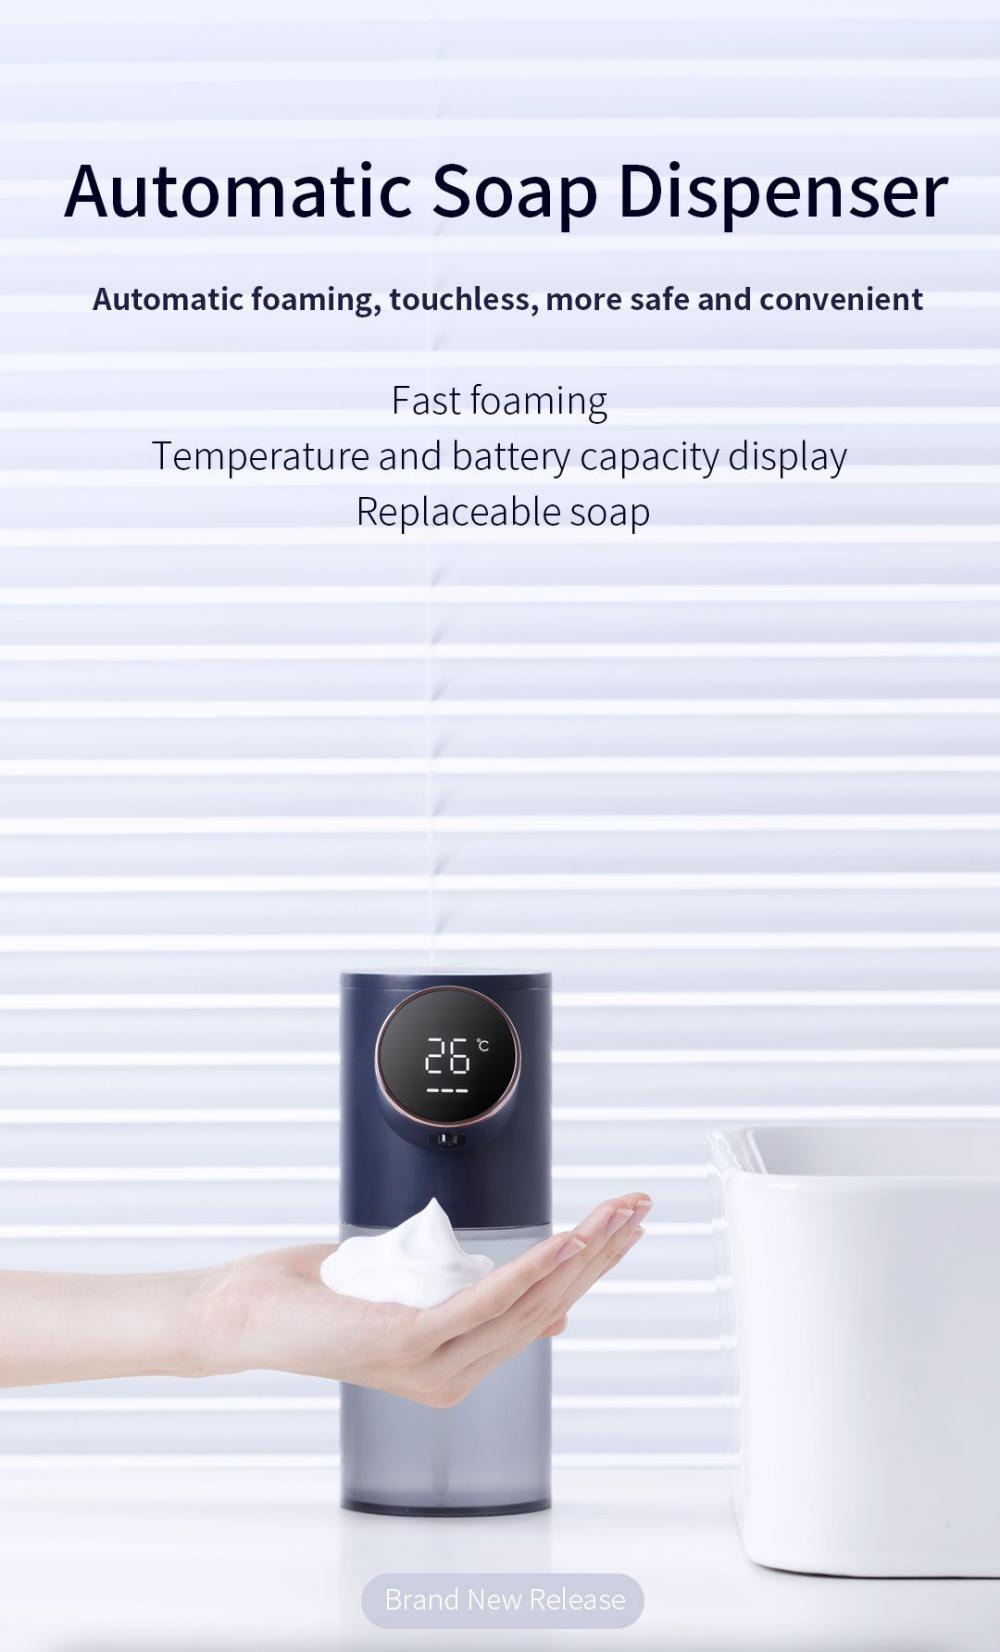 Xiaomi 320ml Automatic Soap Dispenser: USB Rechargeable with Digital Display